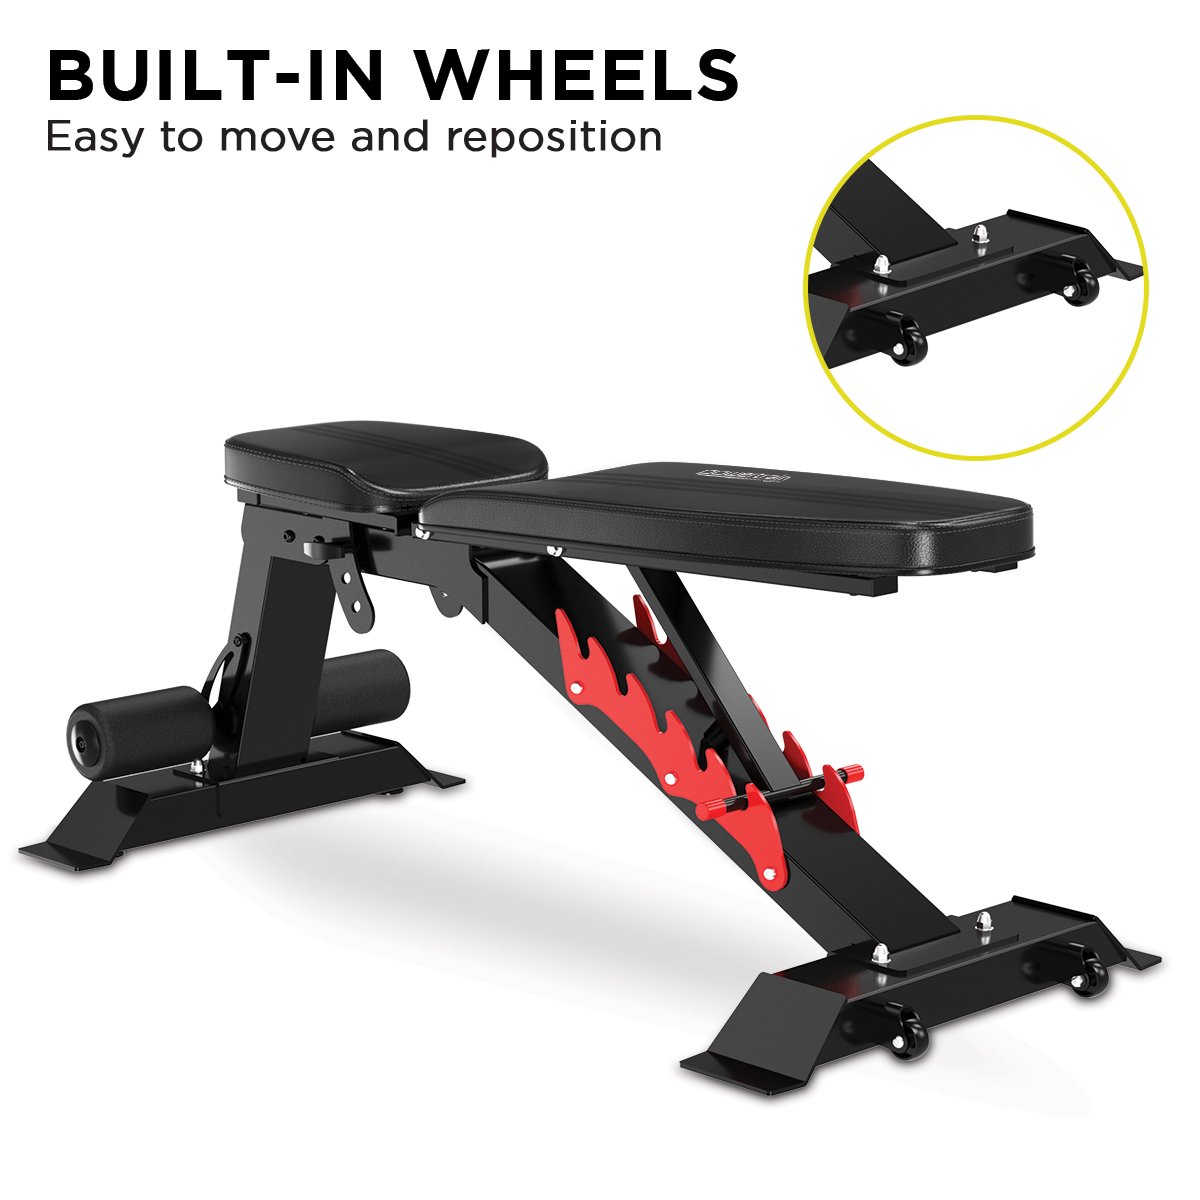 Powertrain Home Gym Adjustable Dumbbell Bench